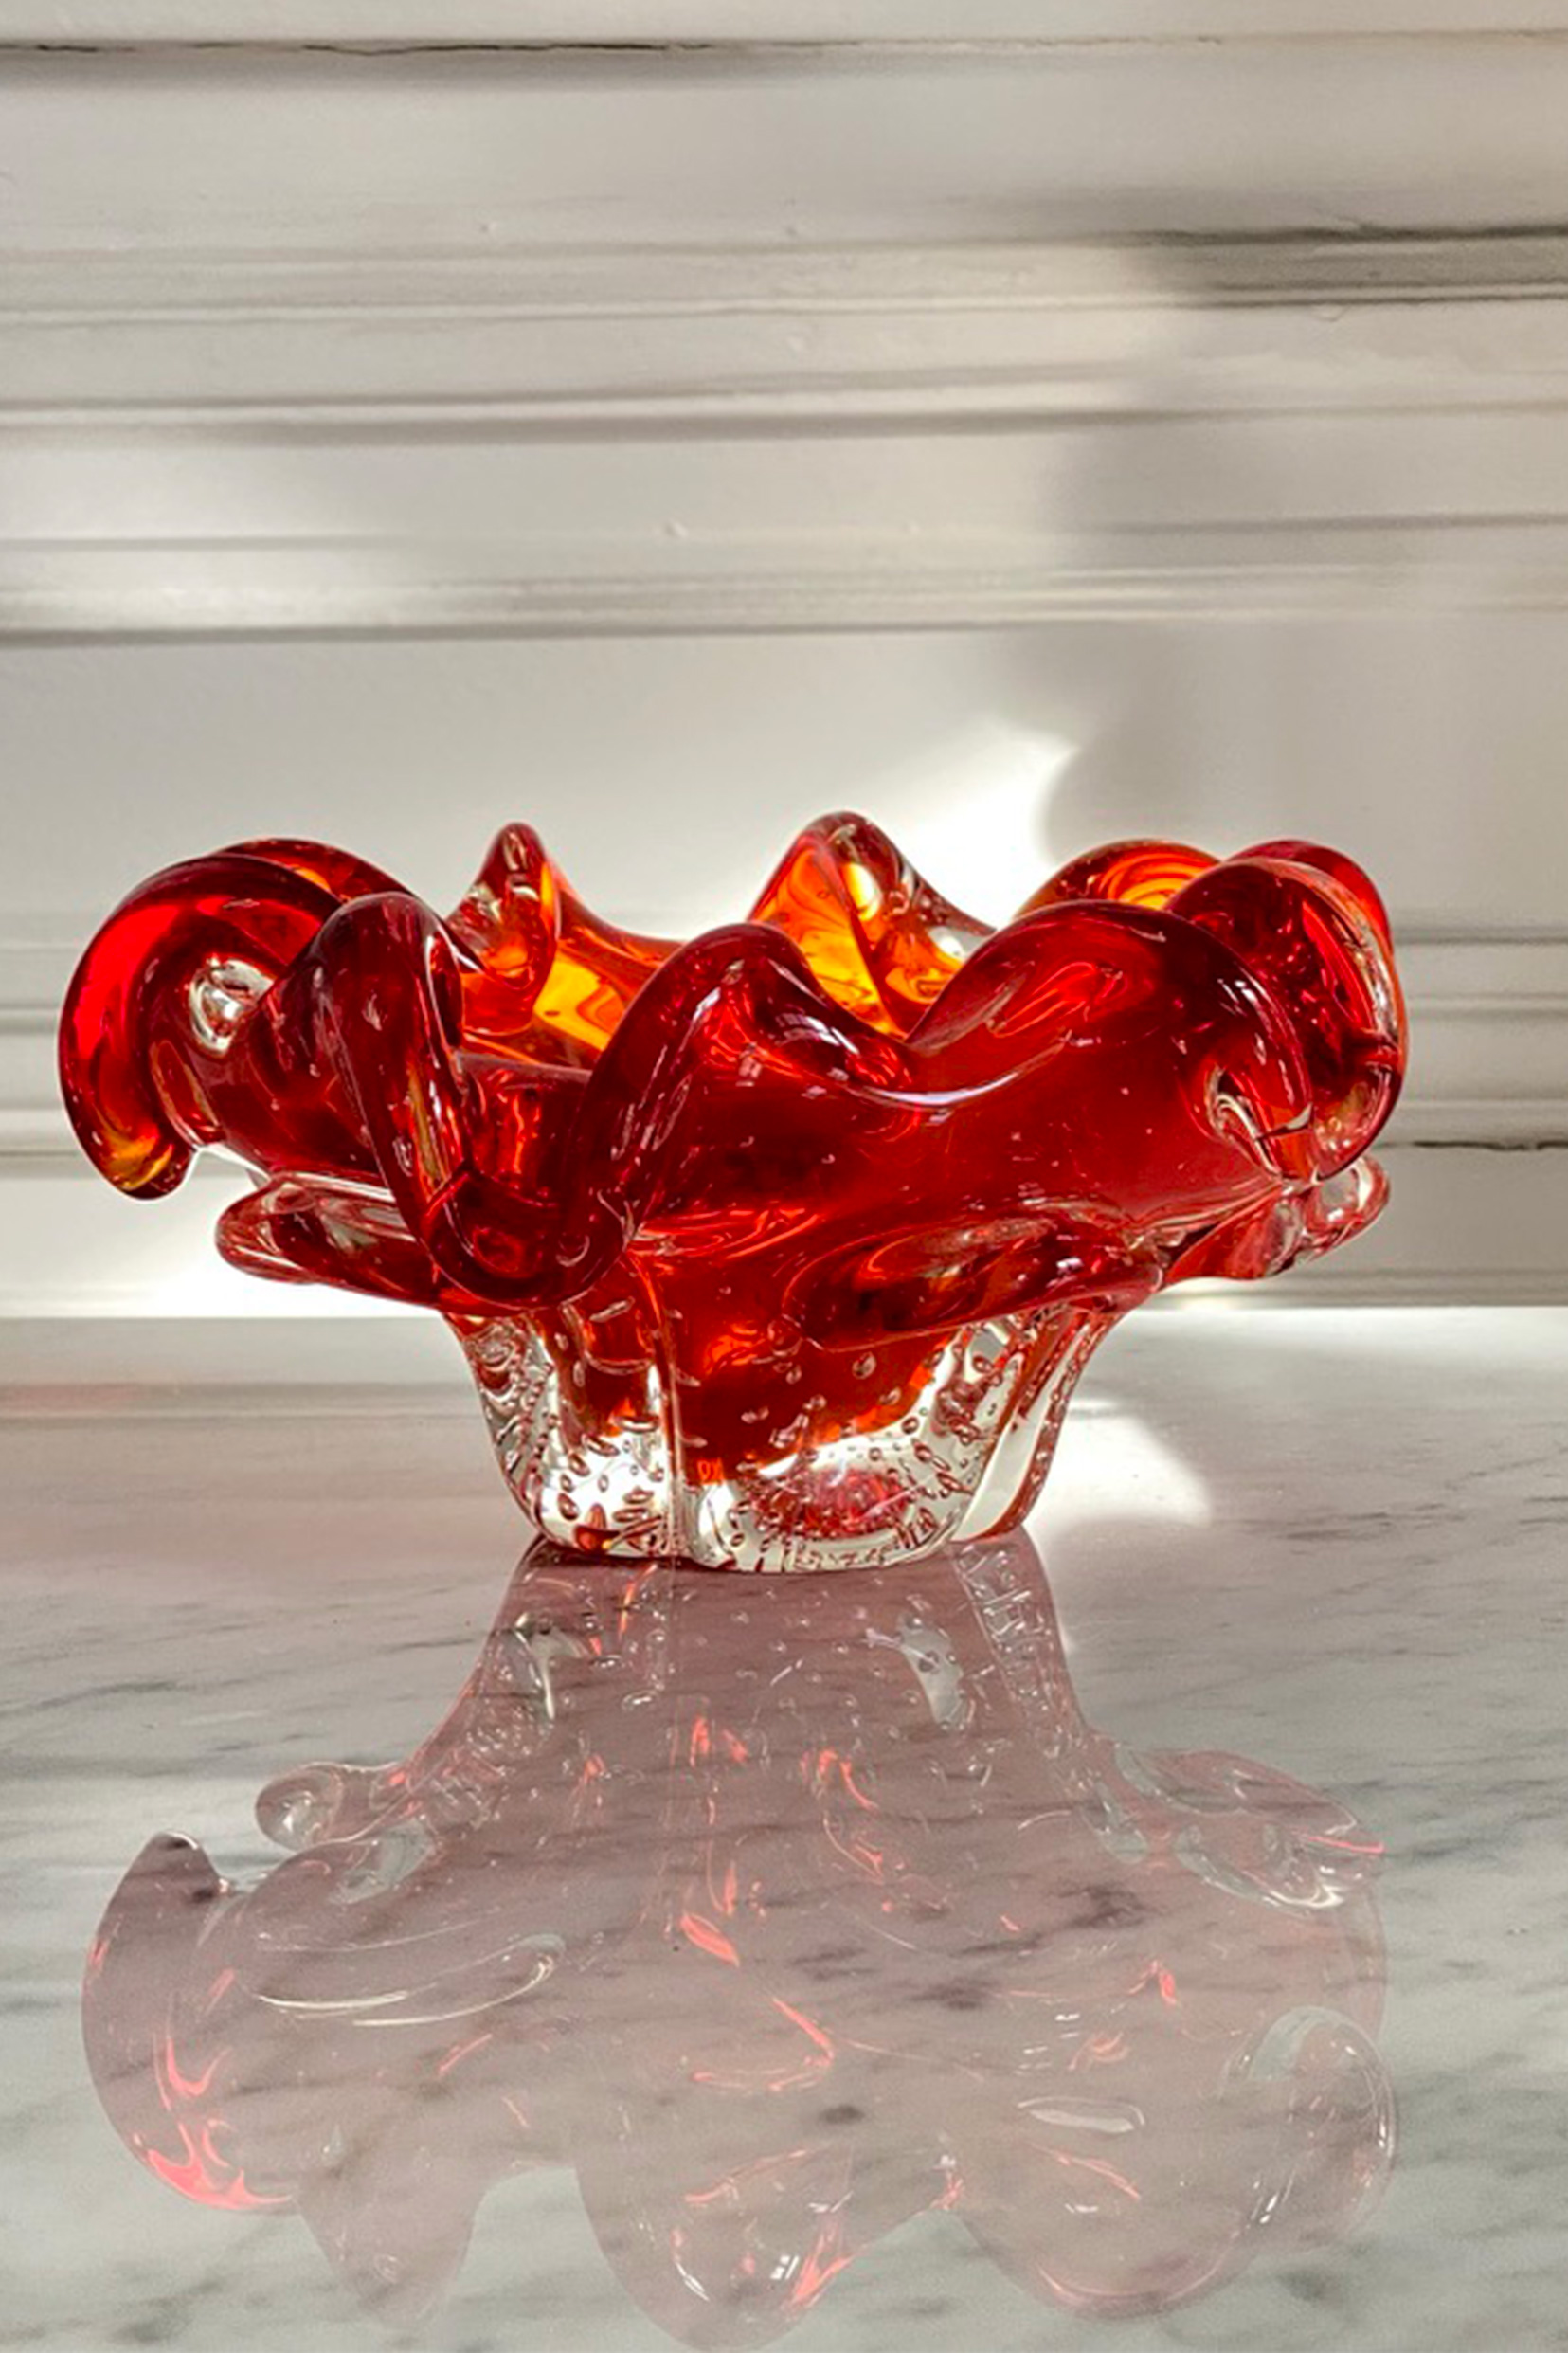 Red and Translucent Murano Glass Bowl, Italy, 1950s